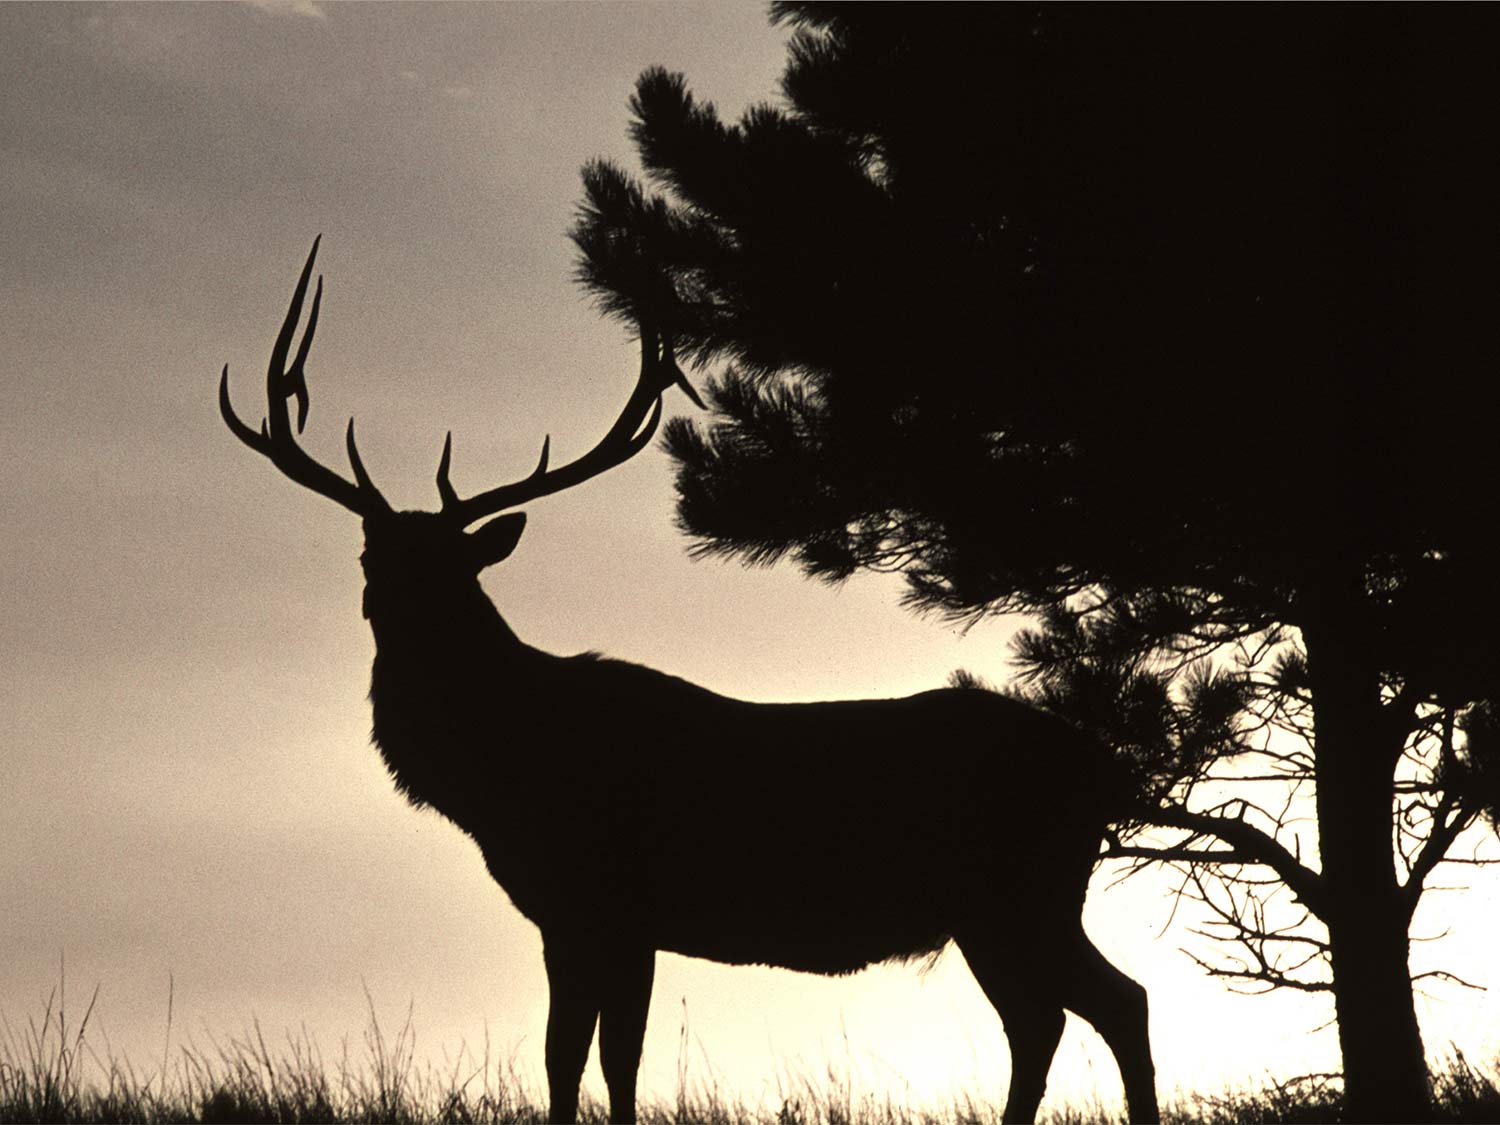 A silhouette of a large bull elk in front of a silhouetted tree, with the sun in the horizon.